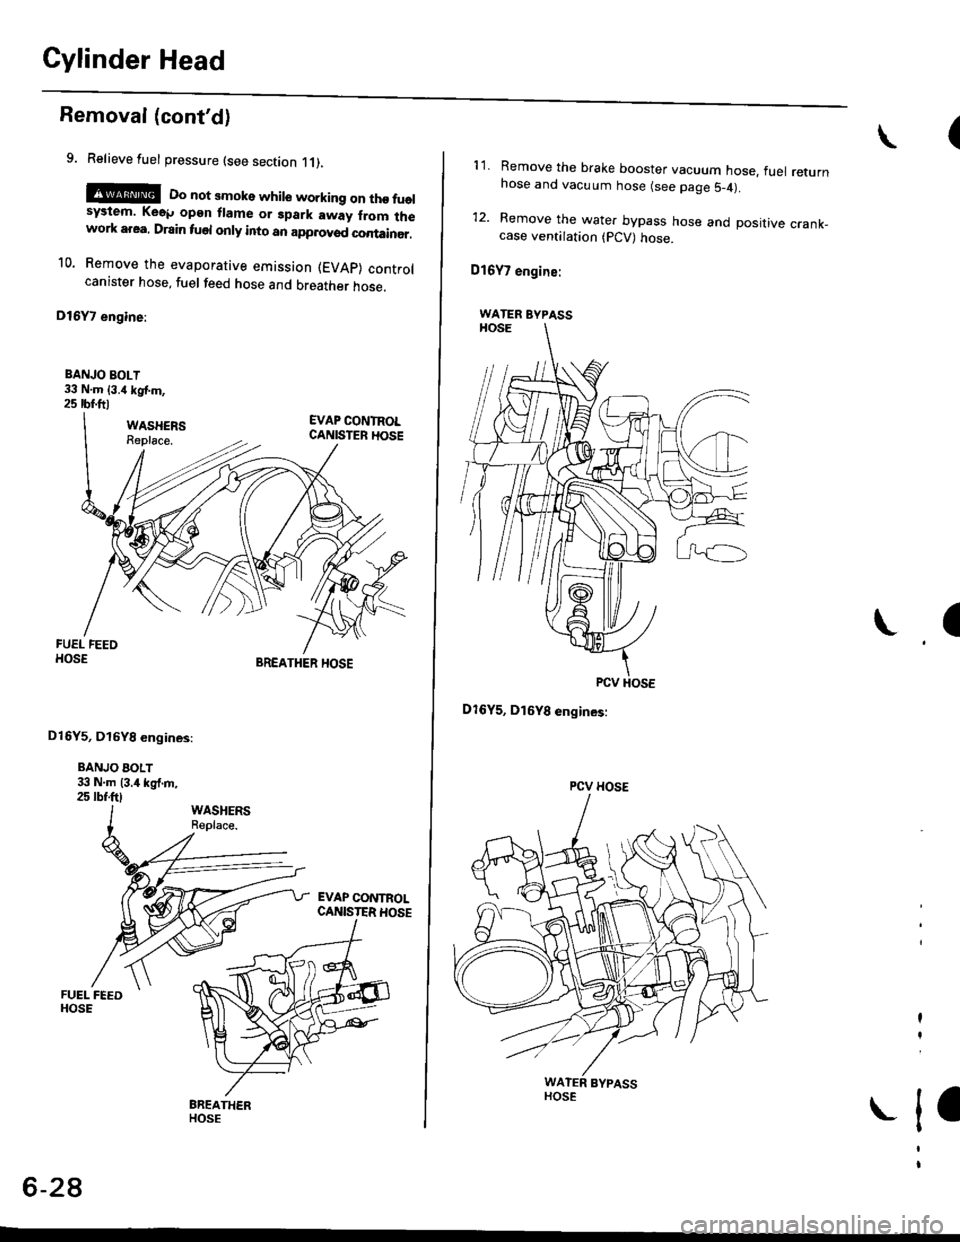 HONDA CIVIC 1998 6.G Owners Manual Cylinder Head
Removal (contd)
9. Relieve fuel pressure (see section 11),
E@E Do not smoke while working on tho fuelsystem. Ke6p opgn flame or gpark away from lhework area, Drain fuel only into an app